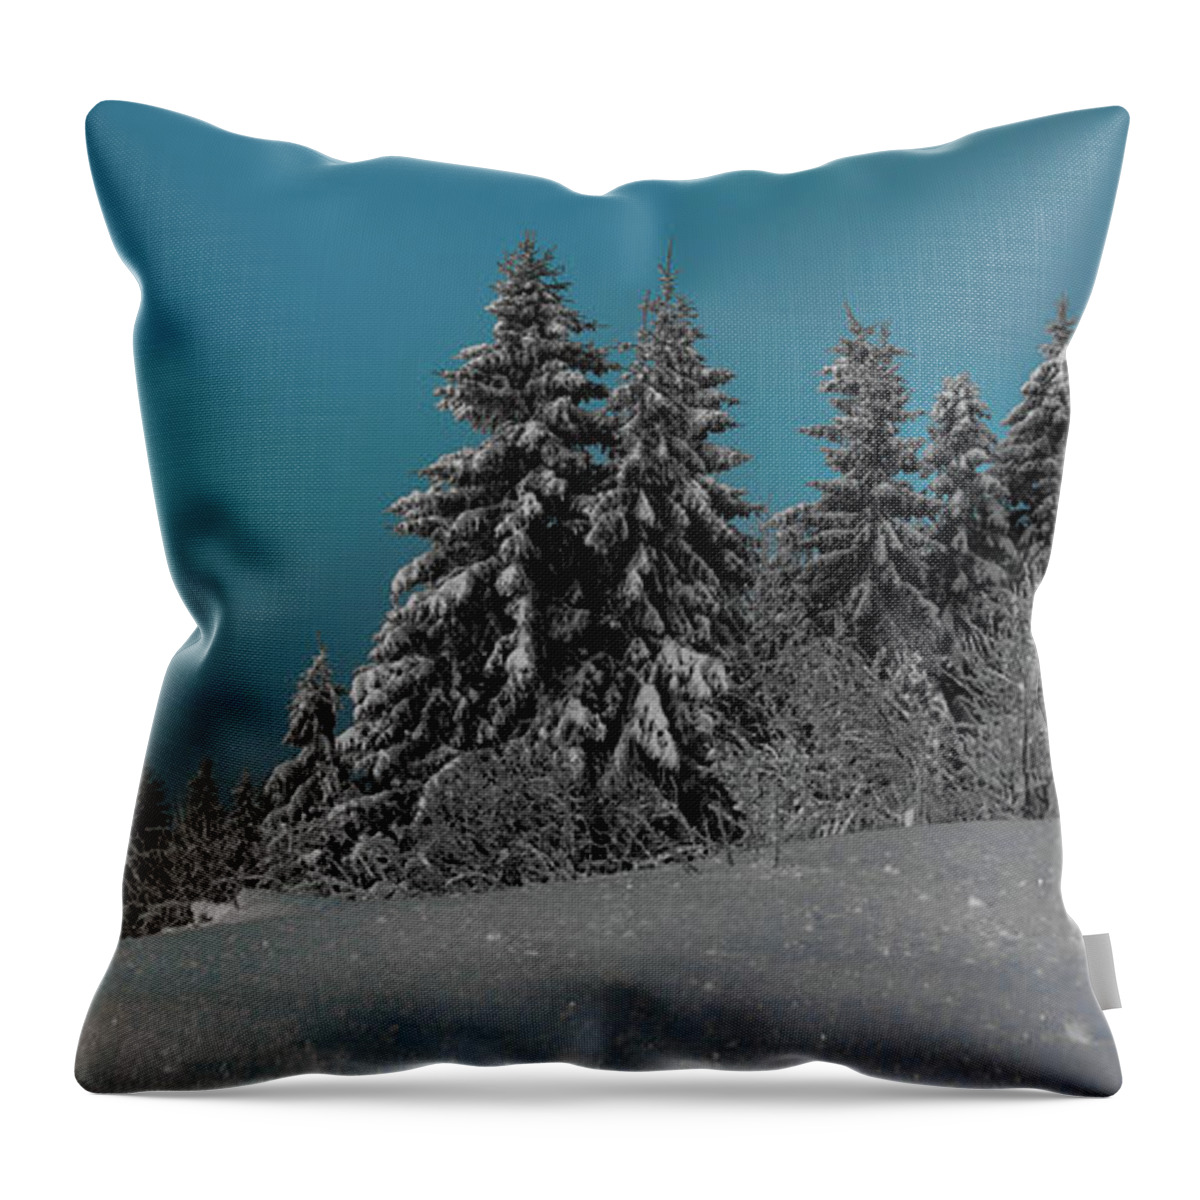 Tranquility Throw Pillow featuring the photograph Winter Light by Tore Thiis Fjeld